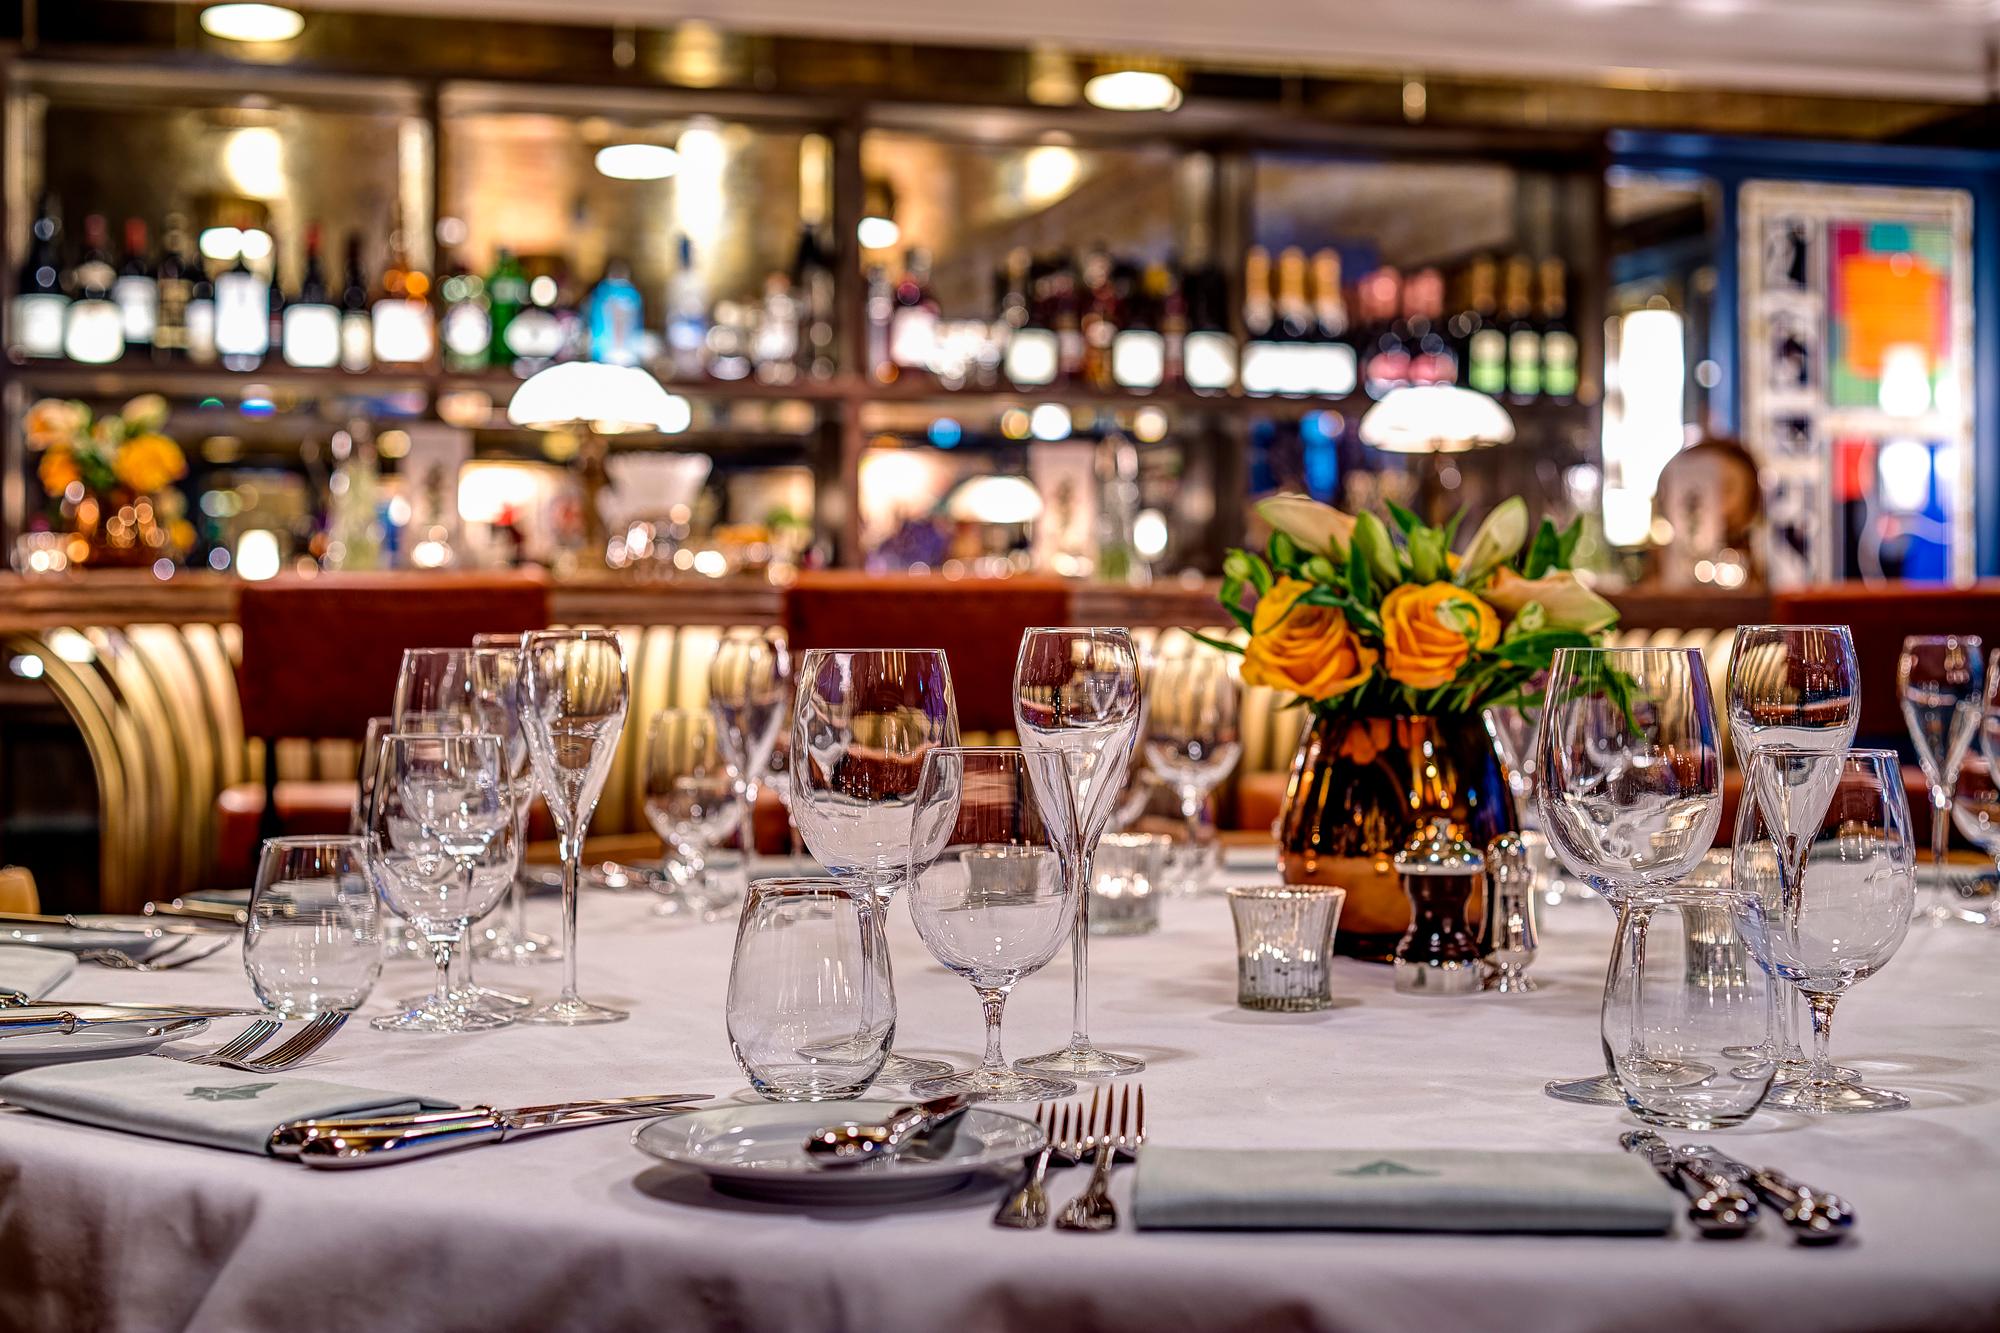 Christmas At The Ivy Soho Brasserie, The Private Room photo #3